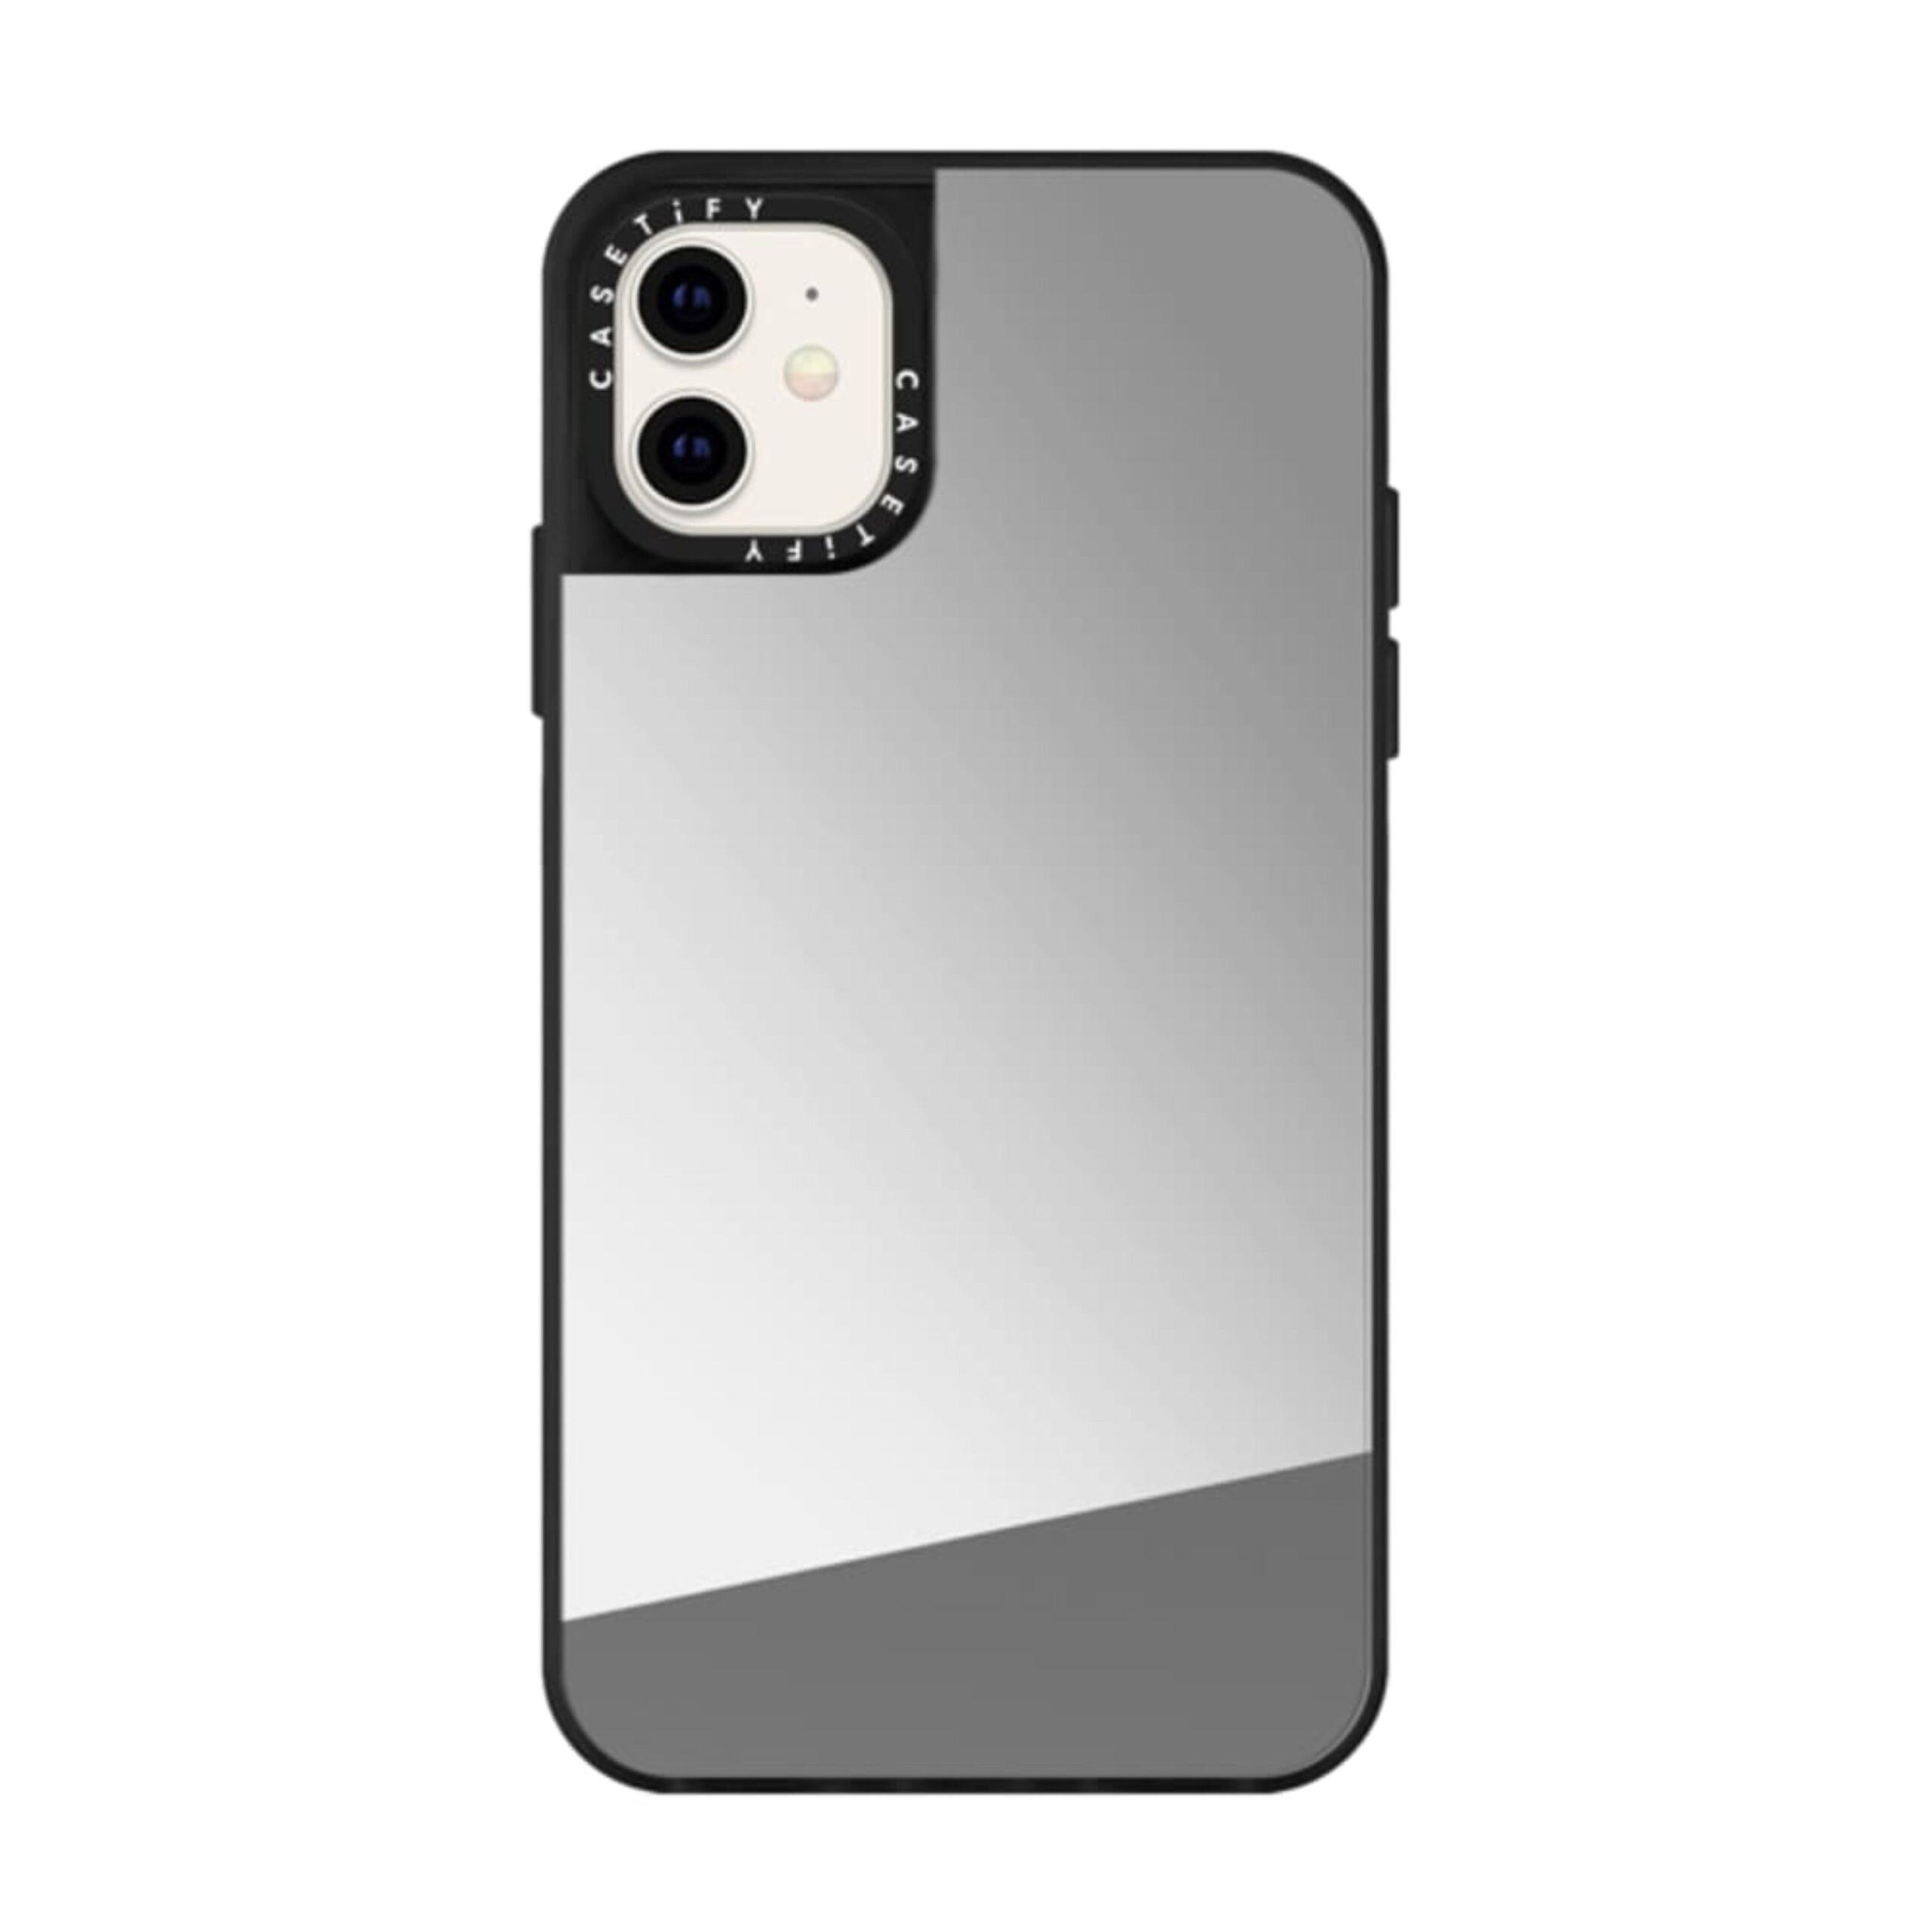 Casetify MIRROR Apple iPhone 12 Mini Case - Reflective Mirror Case, Shockproof TPU Bumper, Slim & LightWeight, Wireless & MagSafe Charging Compatible - Silver